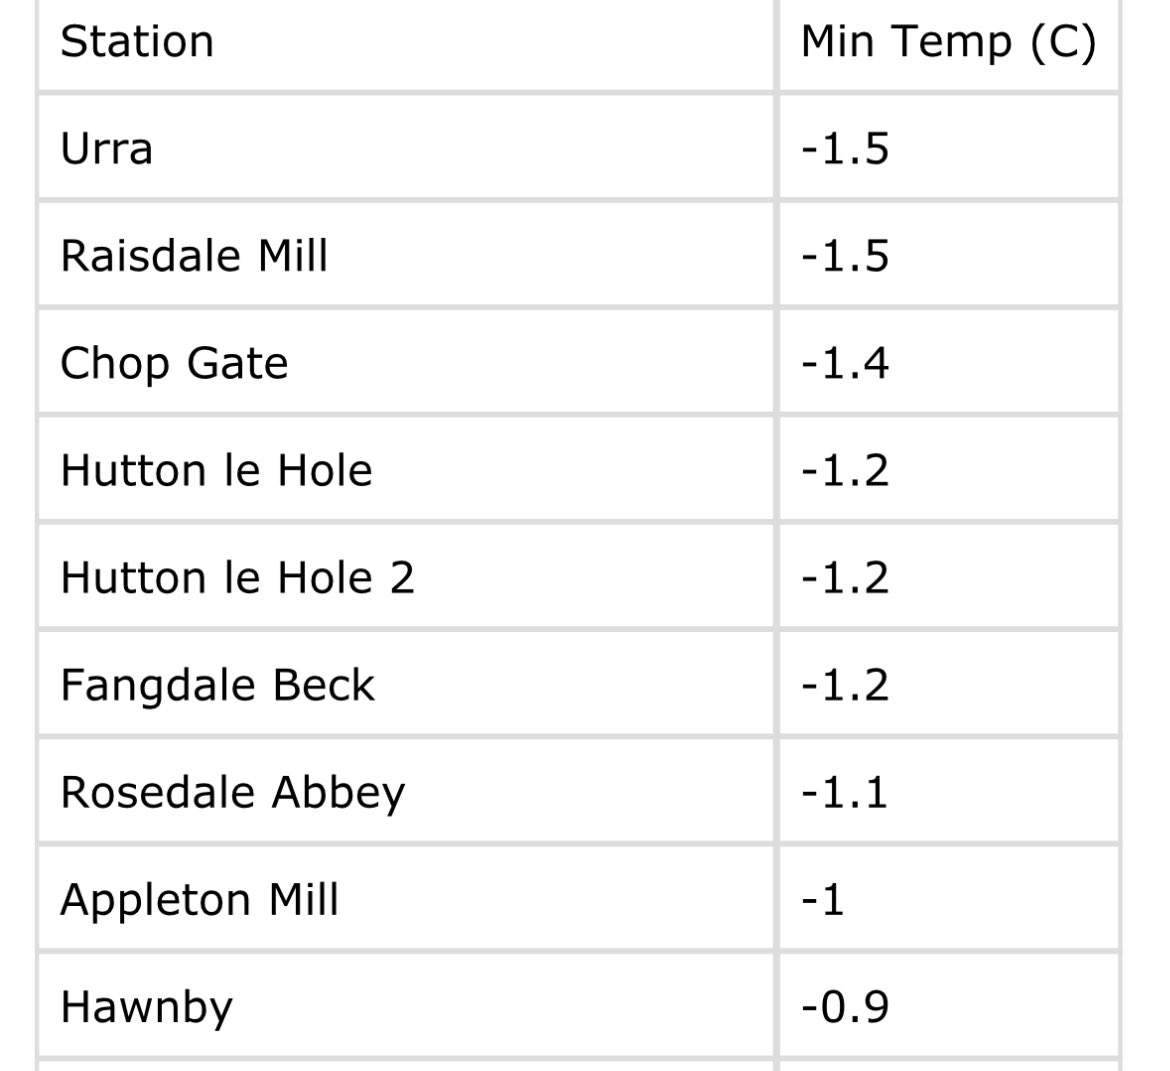 Below freezing for some places on #NorthYorkMoors overnight. Urra and Raisdale Mill coldest at -1.5°C.